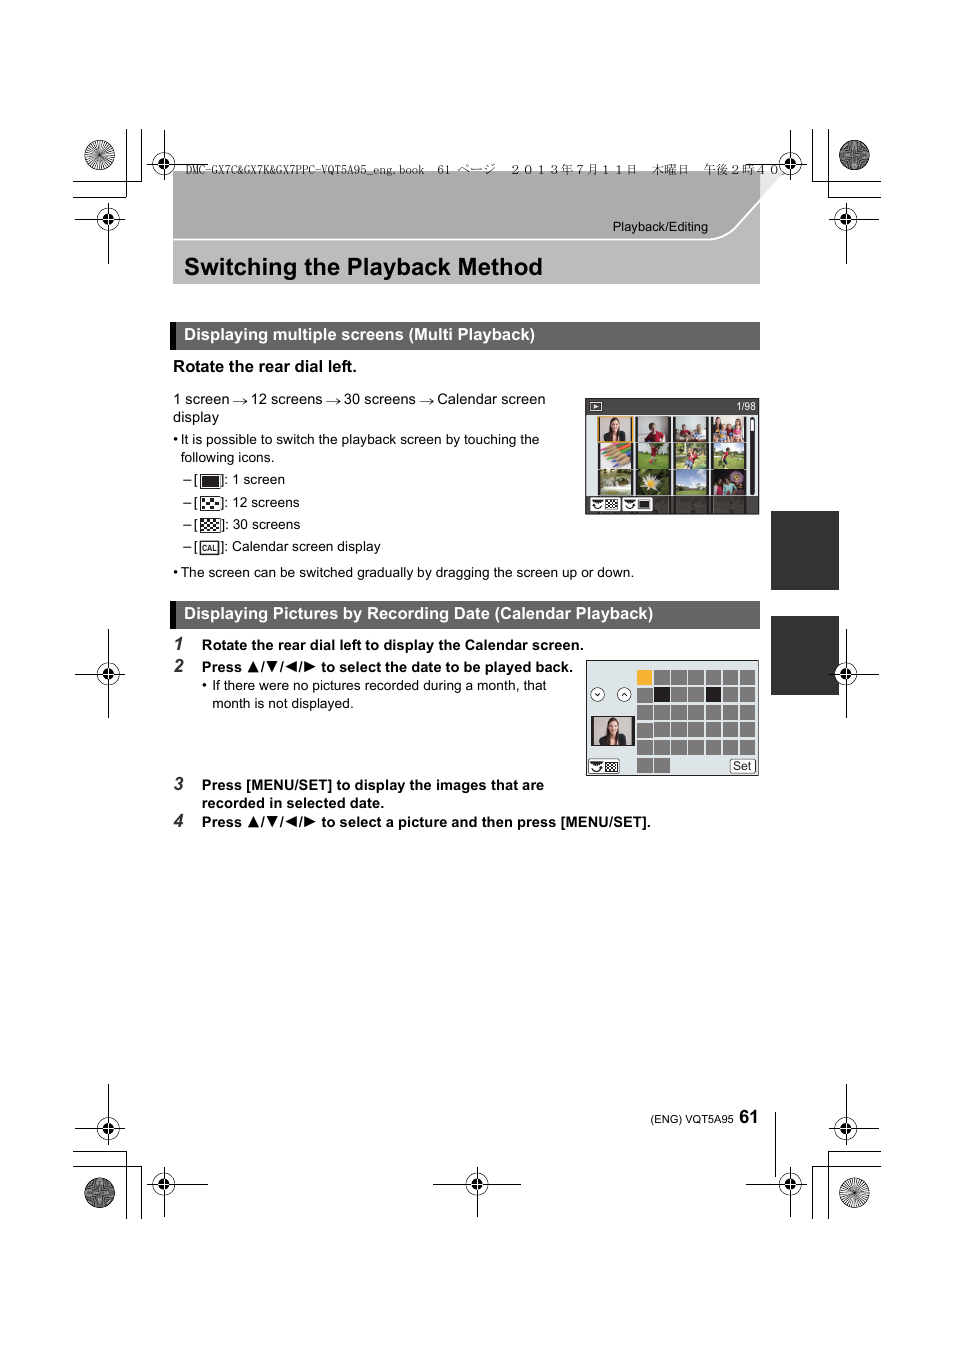 Playback/editing, Switching the playback method, Displaying multiple screens (multi playback) | Rotate the rear dial left | Panasonic DMC-GX7SBODY User Manual | Page 61 / 104